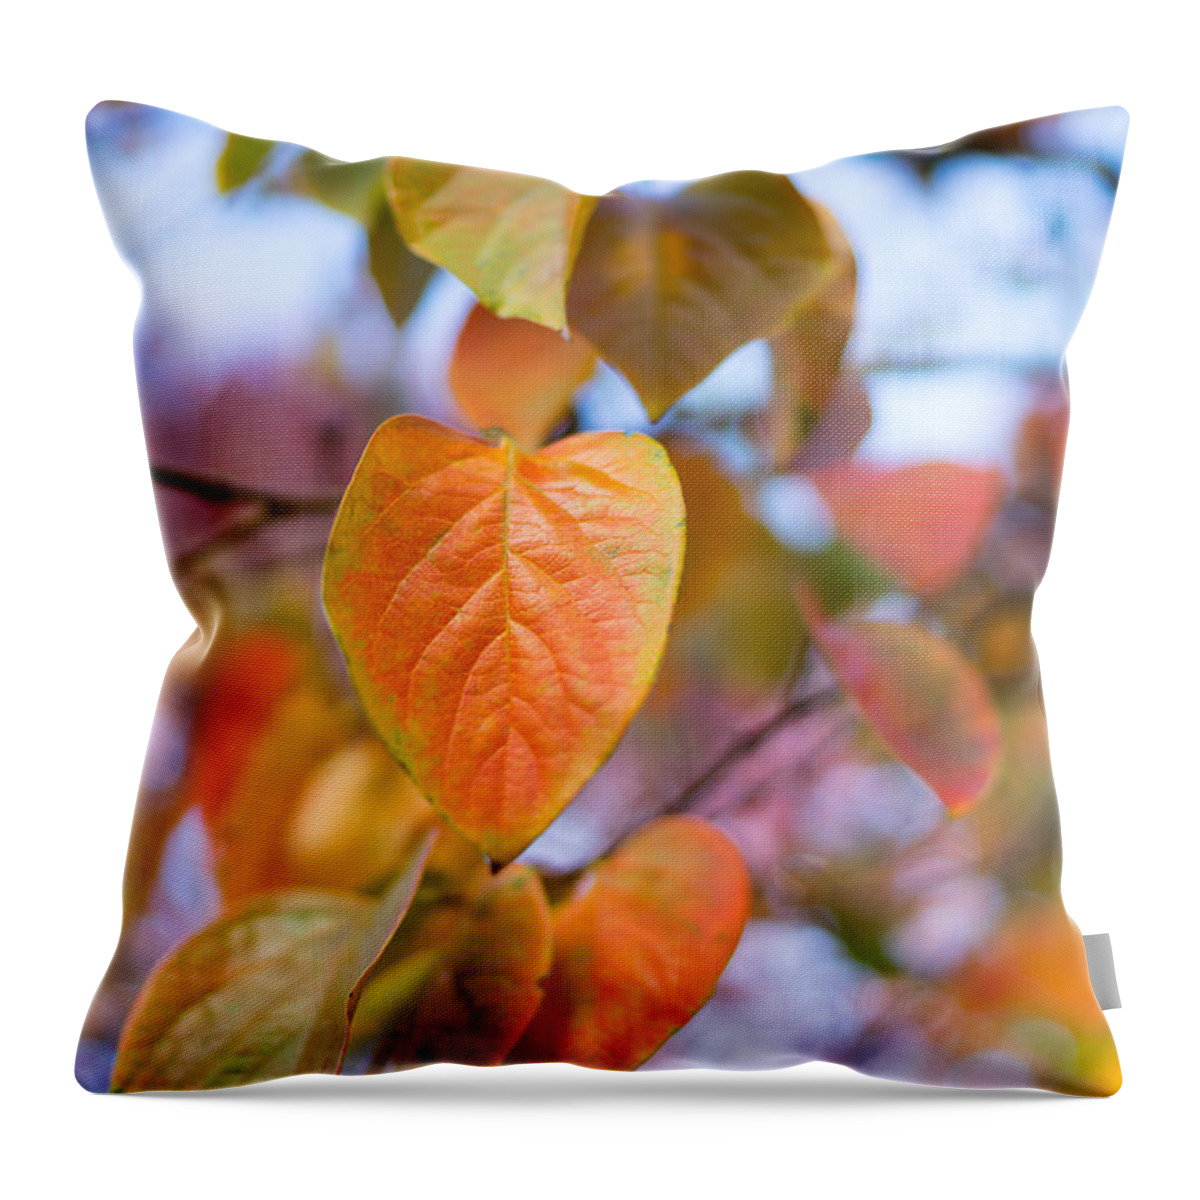 Leaves Throw Pillow featuring the photograph Gentle Breeze by Derek Dean